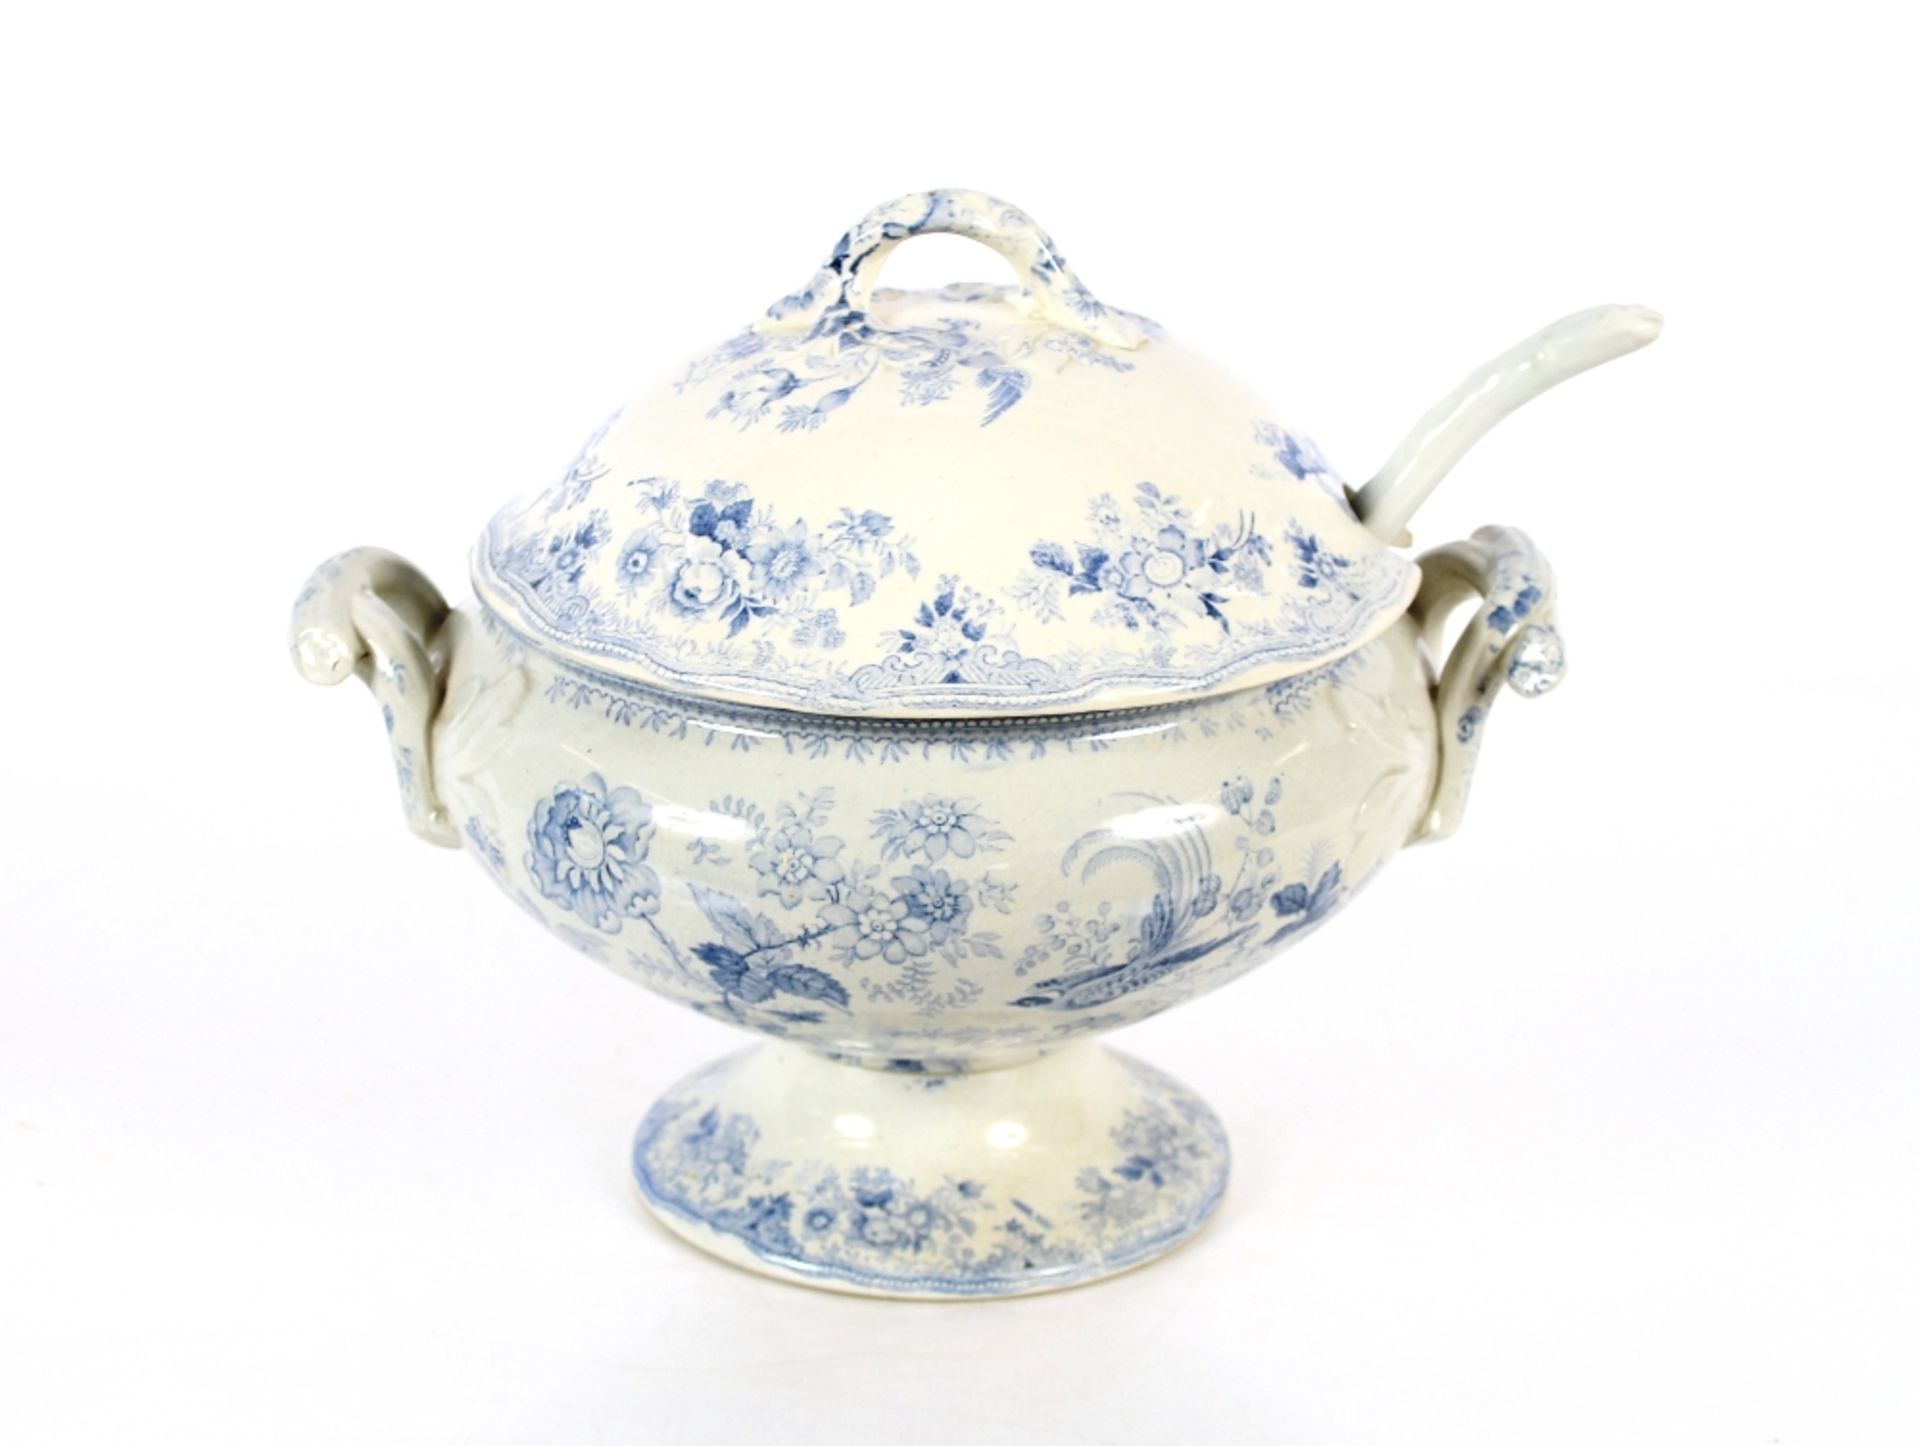 A Victorian blue and white Asiatic pheasant pattern tureen and cover with associated china ladle